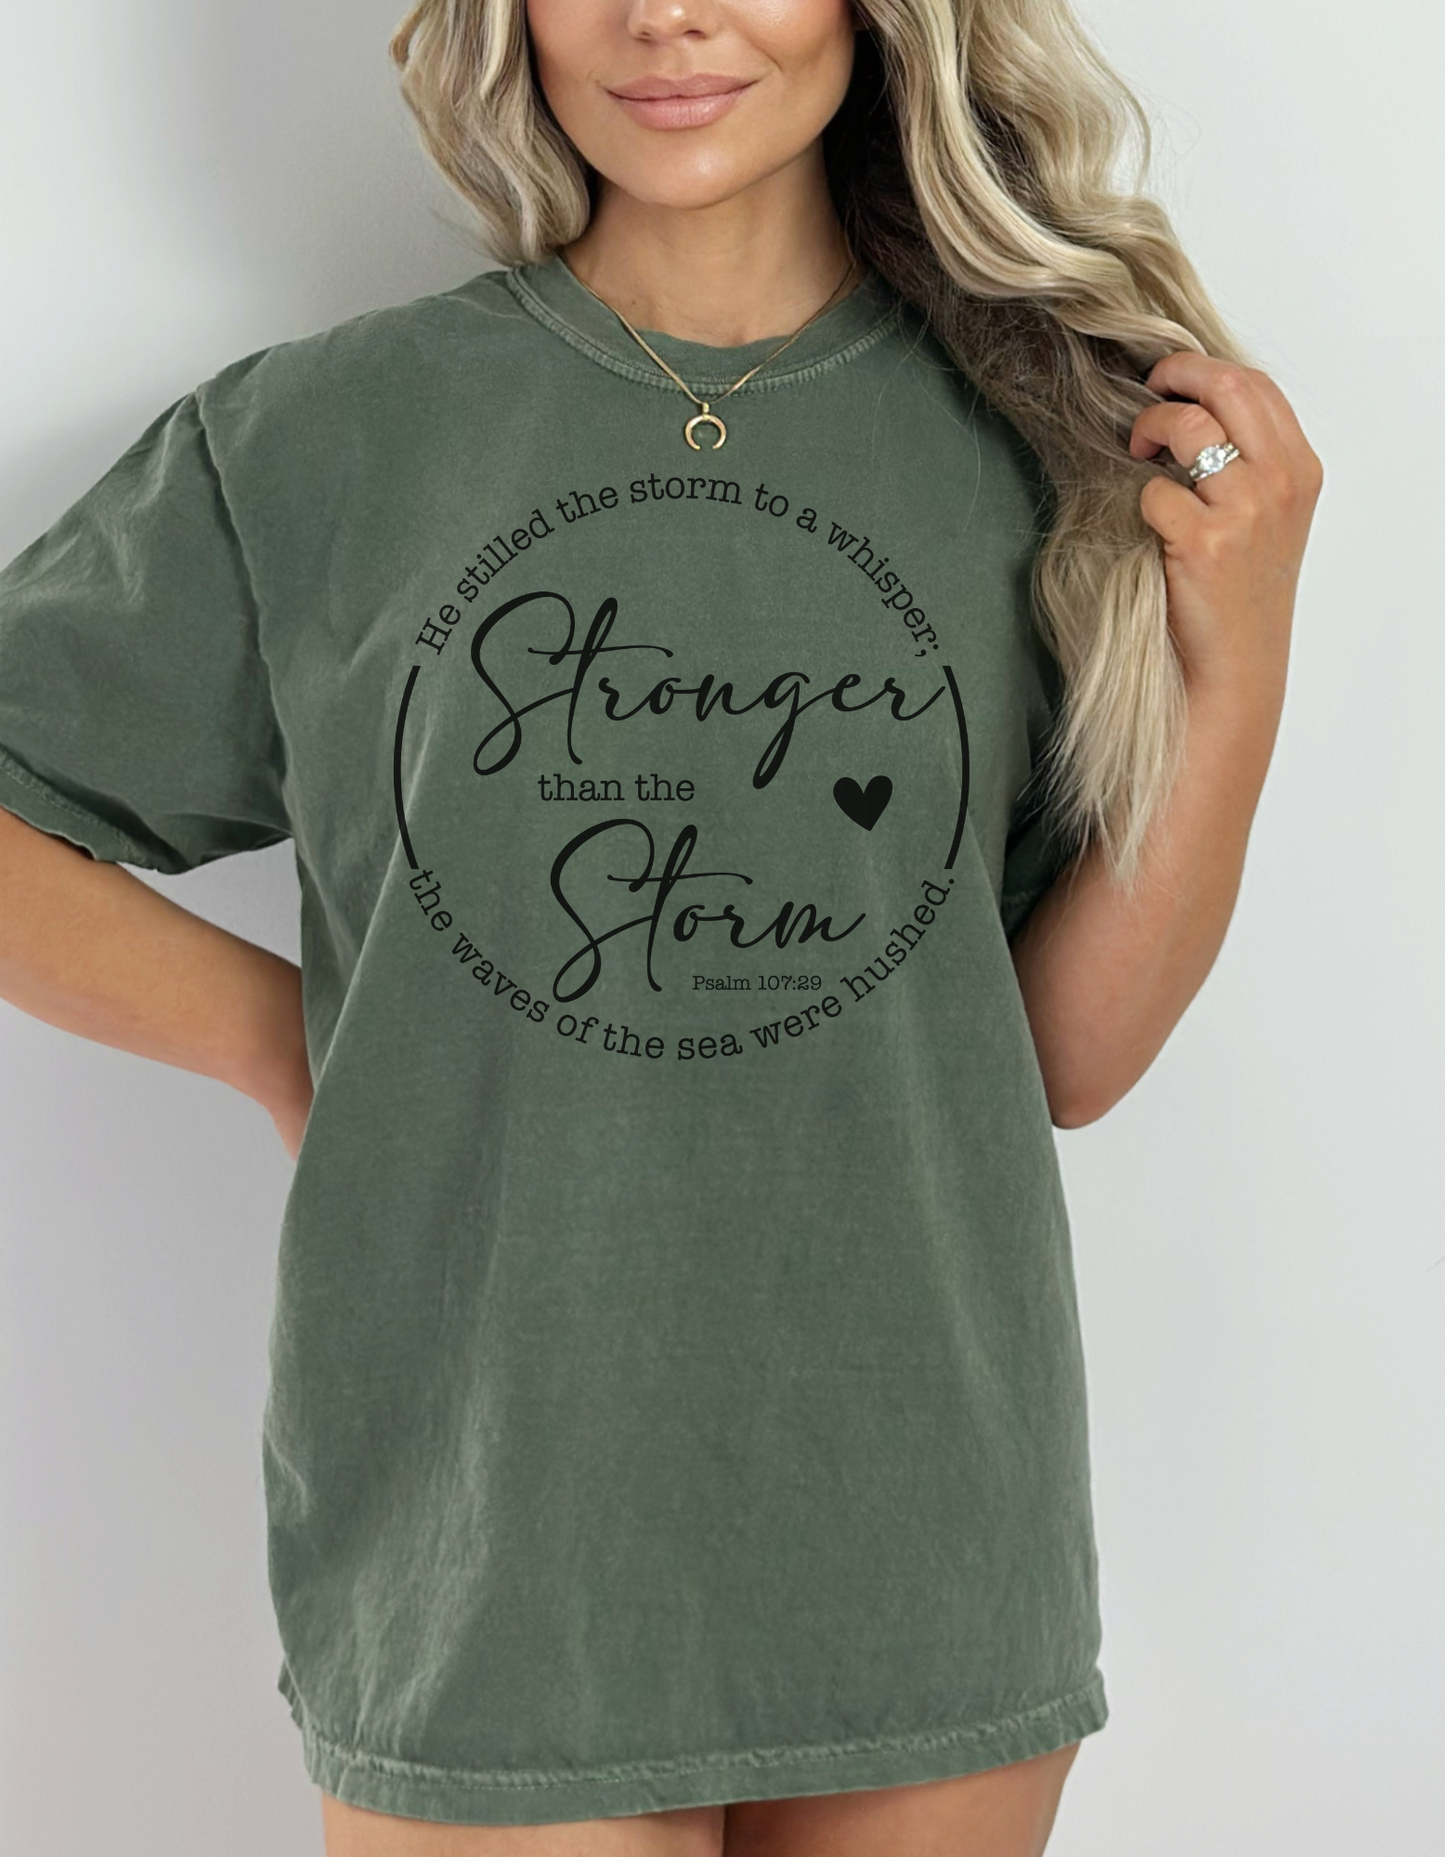 "Stronger than the storm"